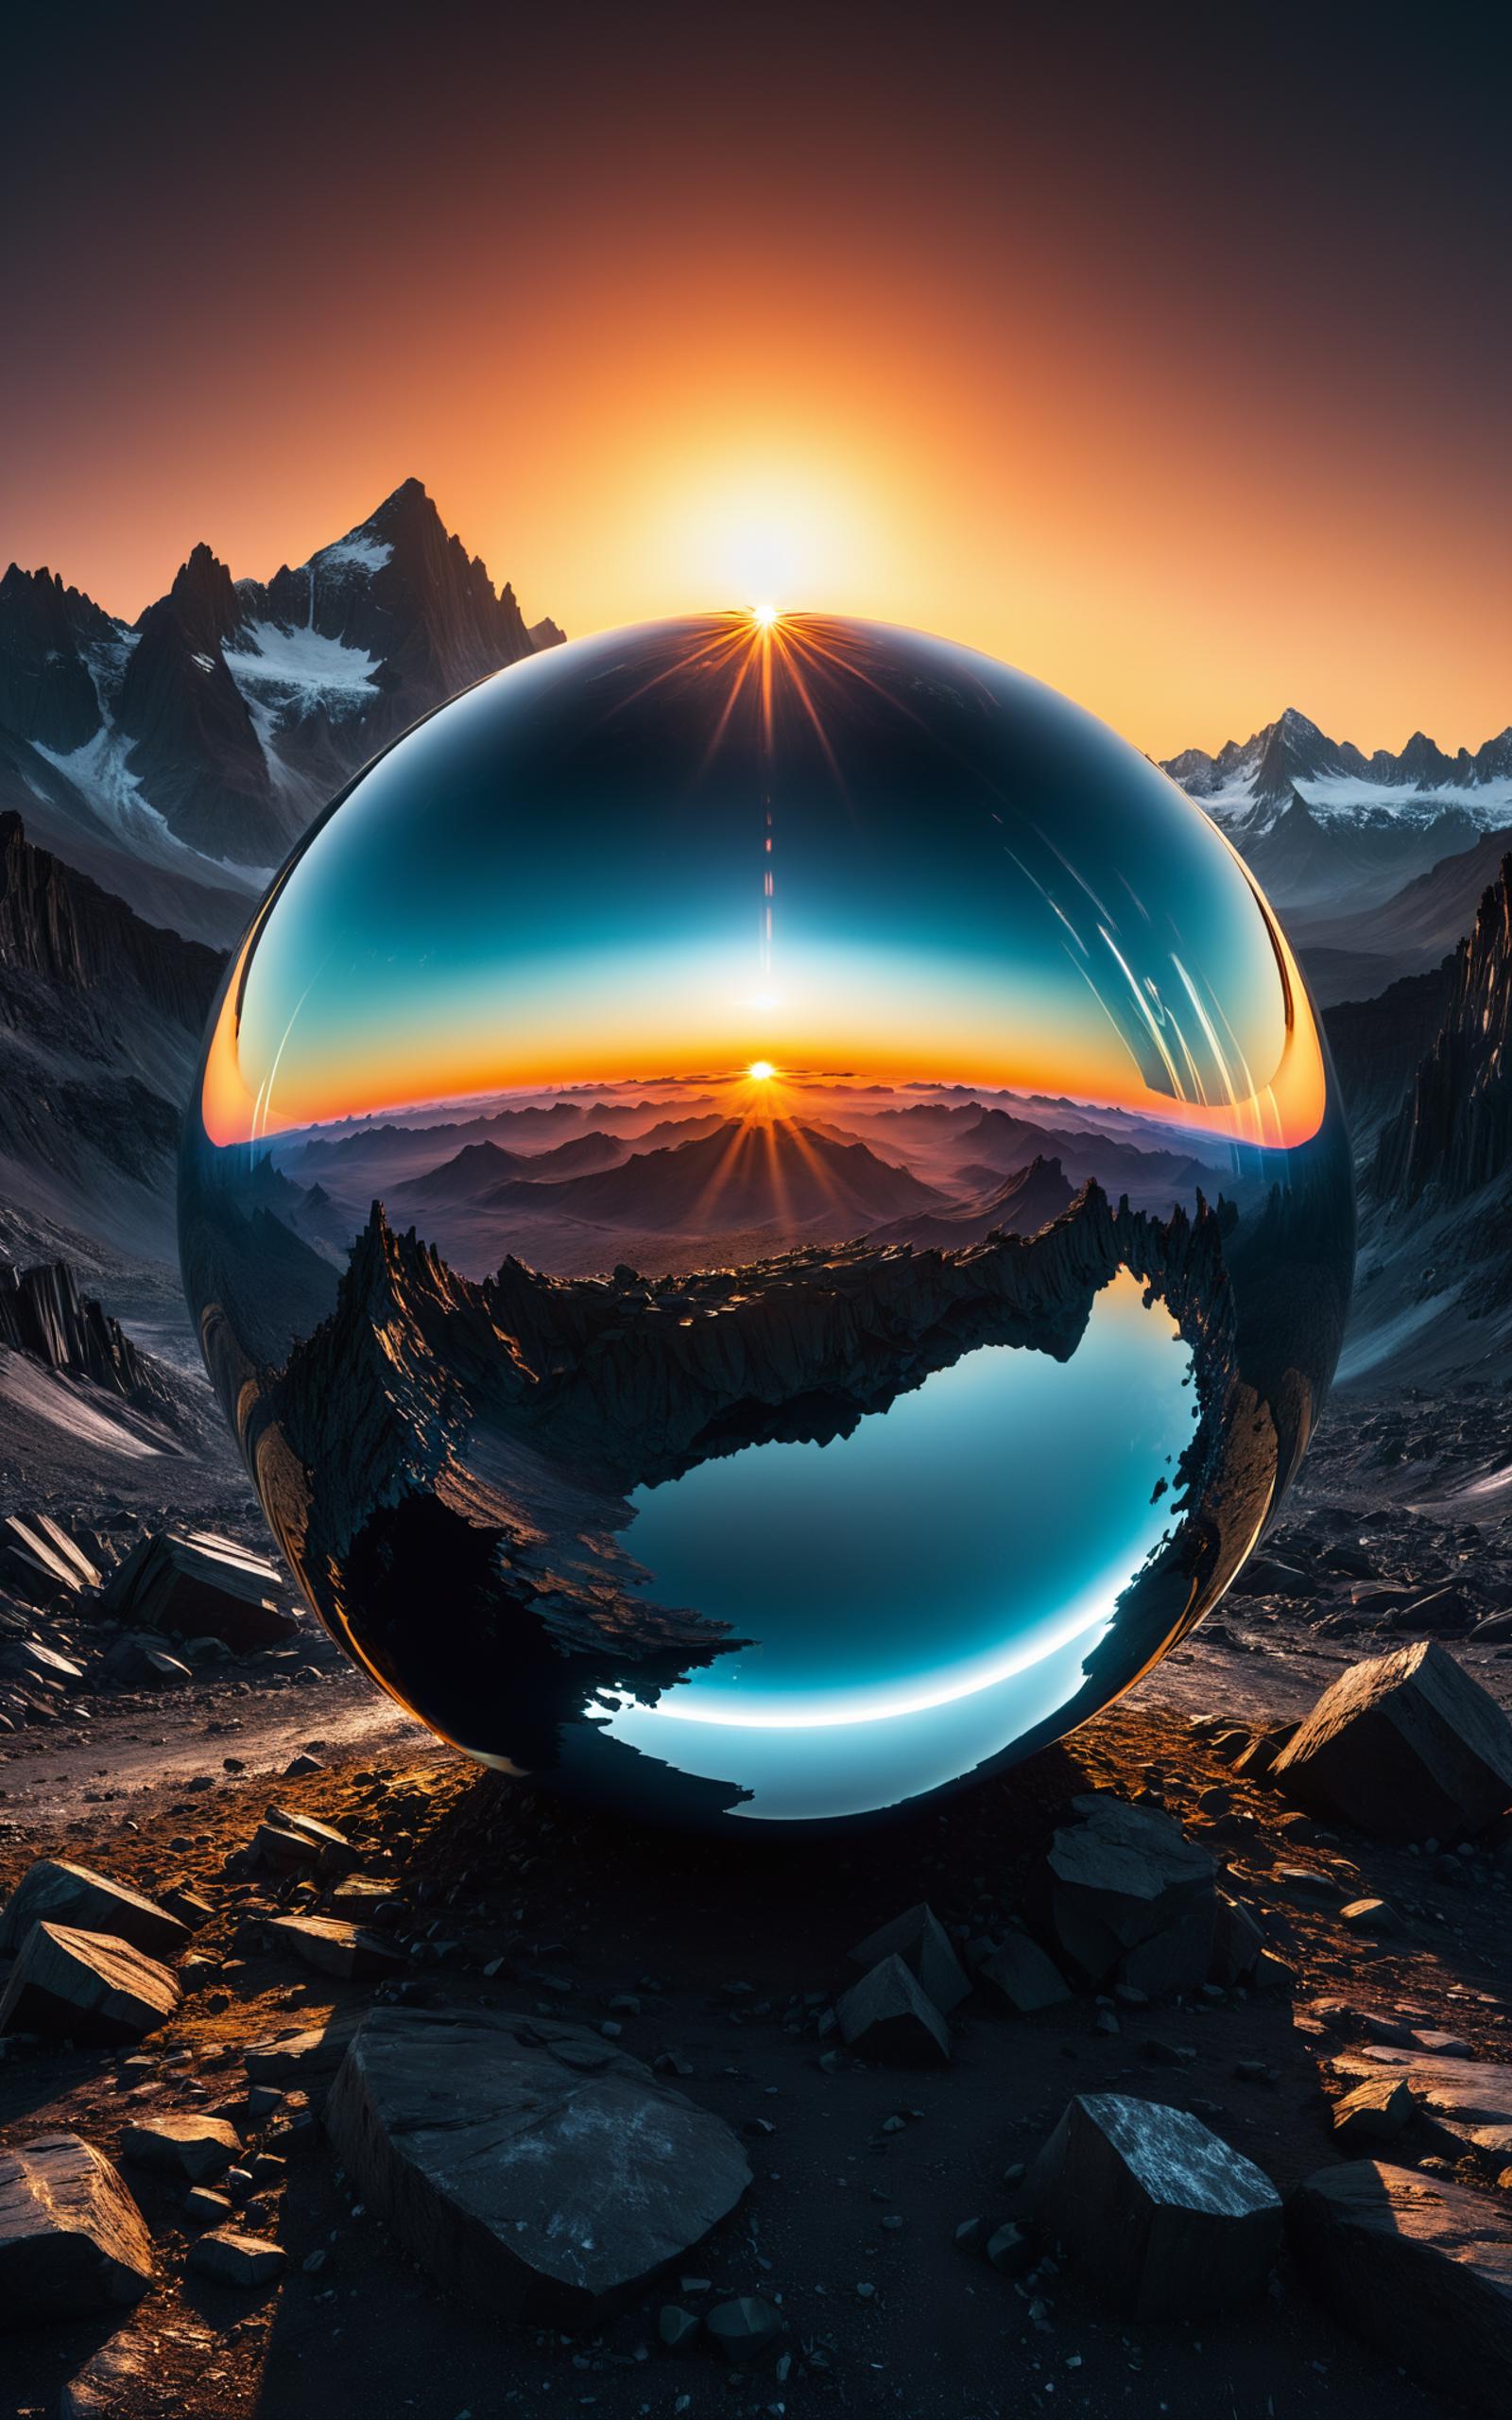 A Giant Ball Reflecting the Sun and Mountains in the Background